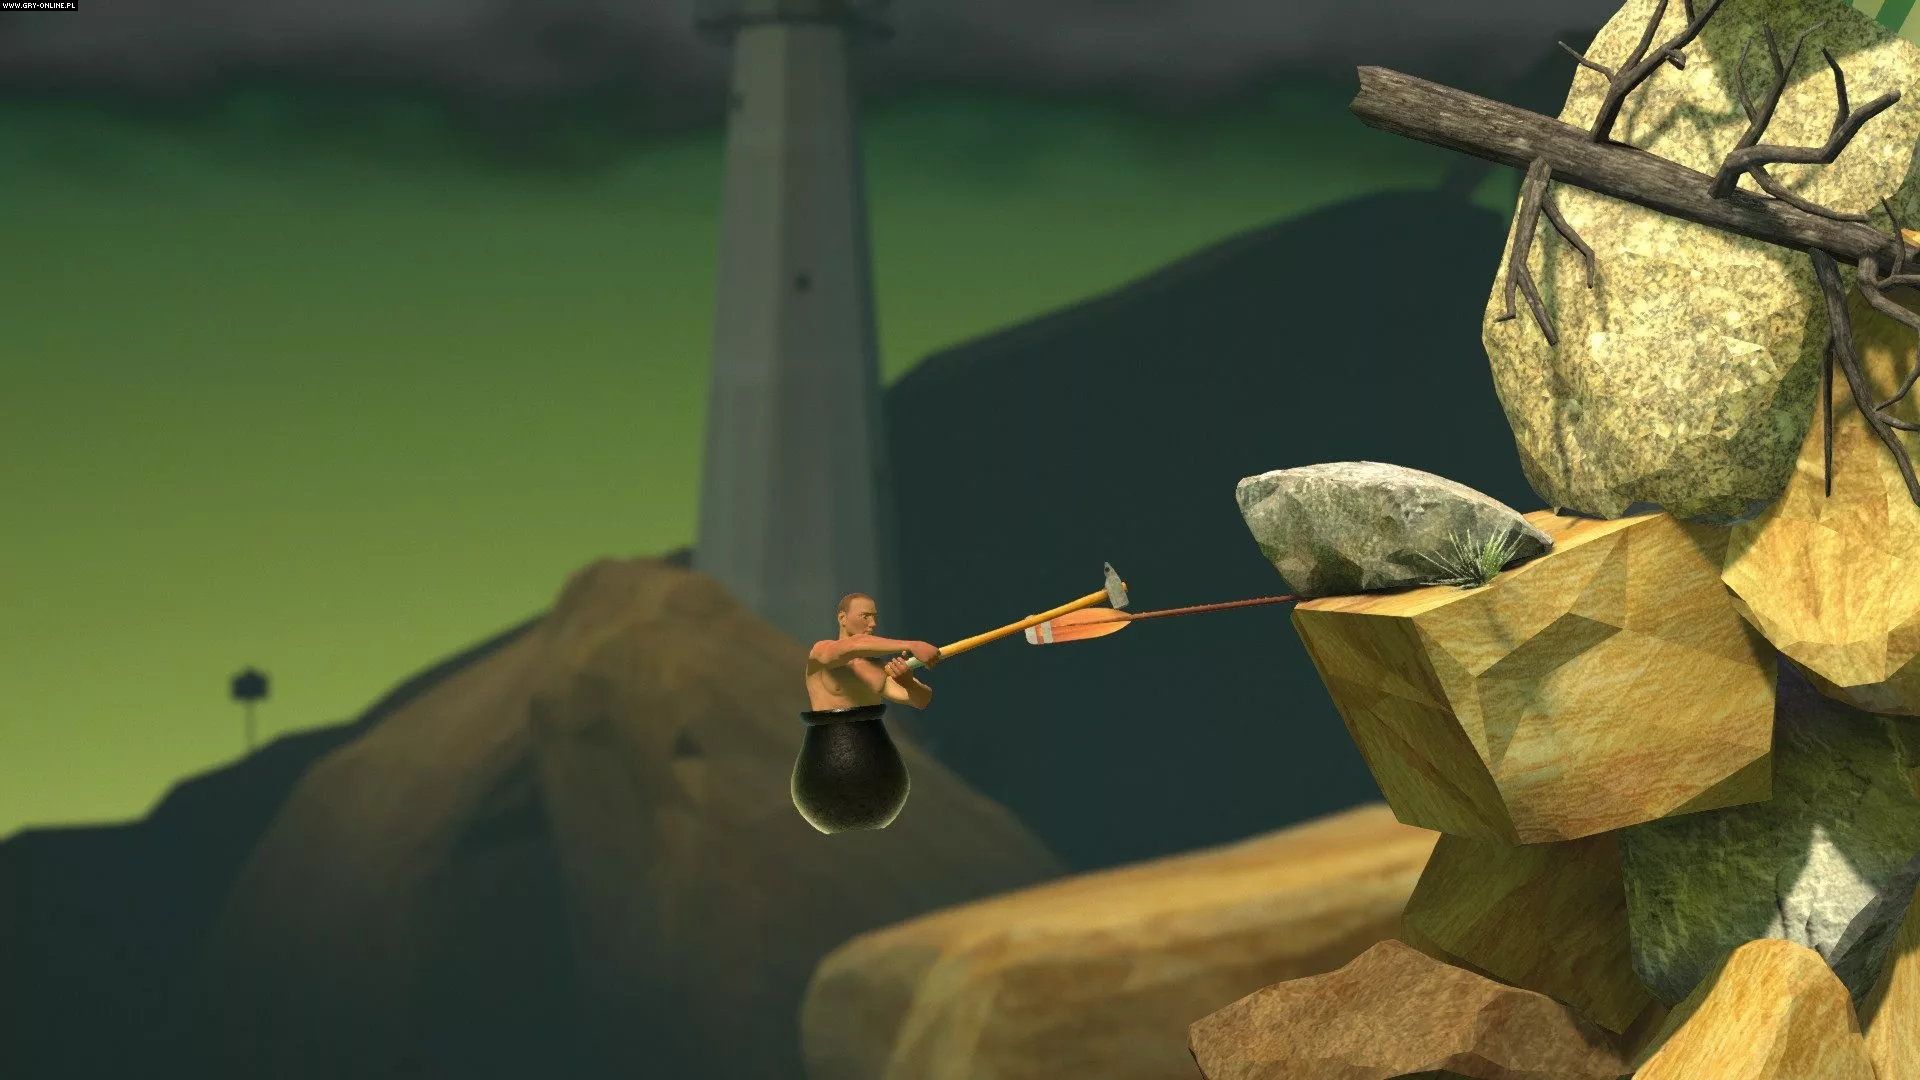 Getting Over It Torrent